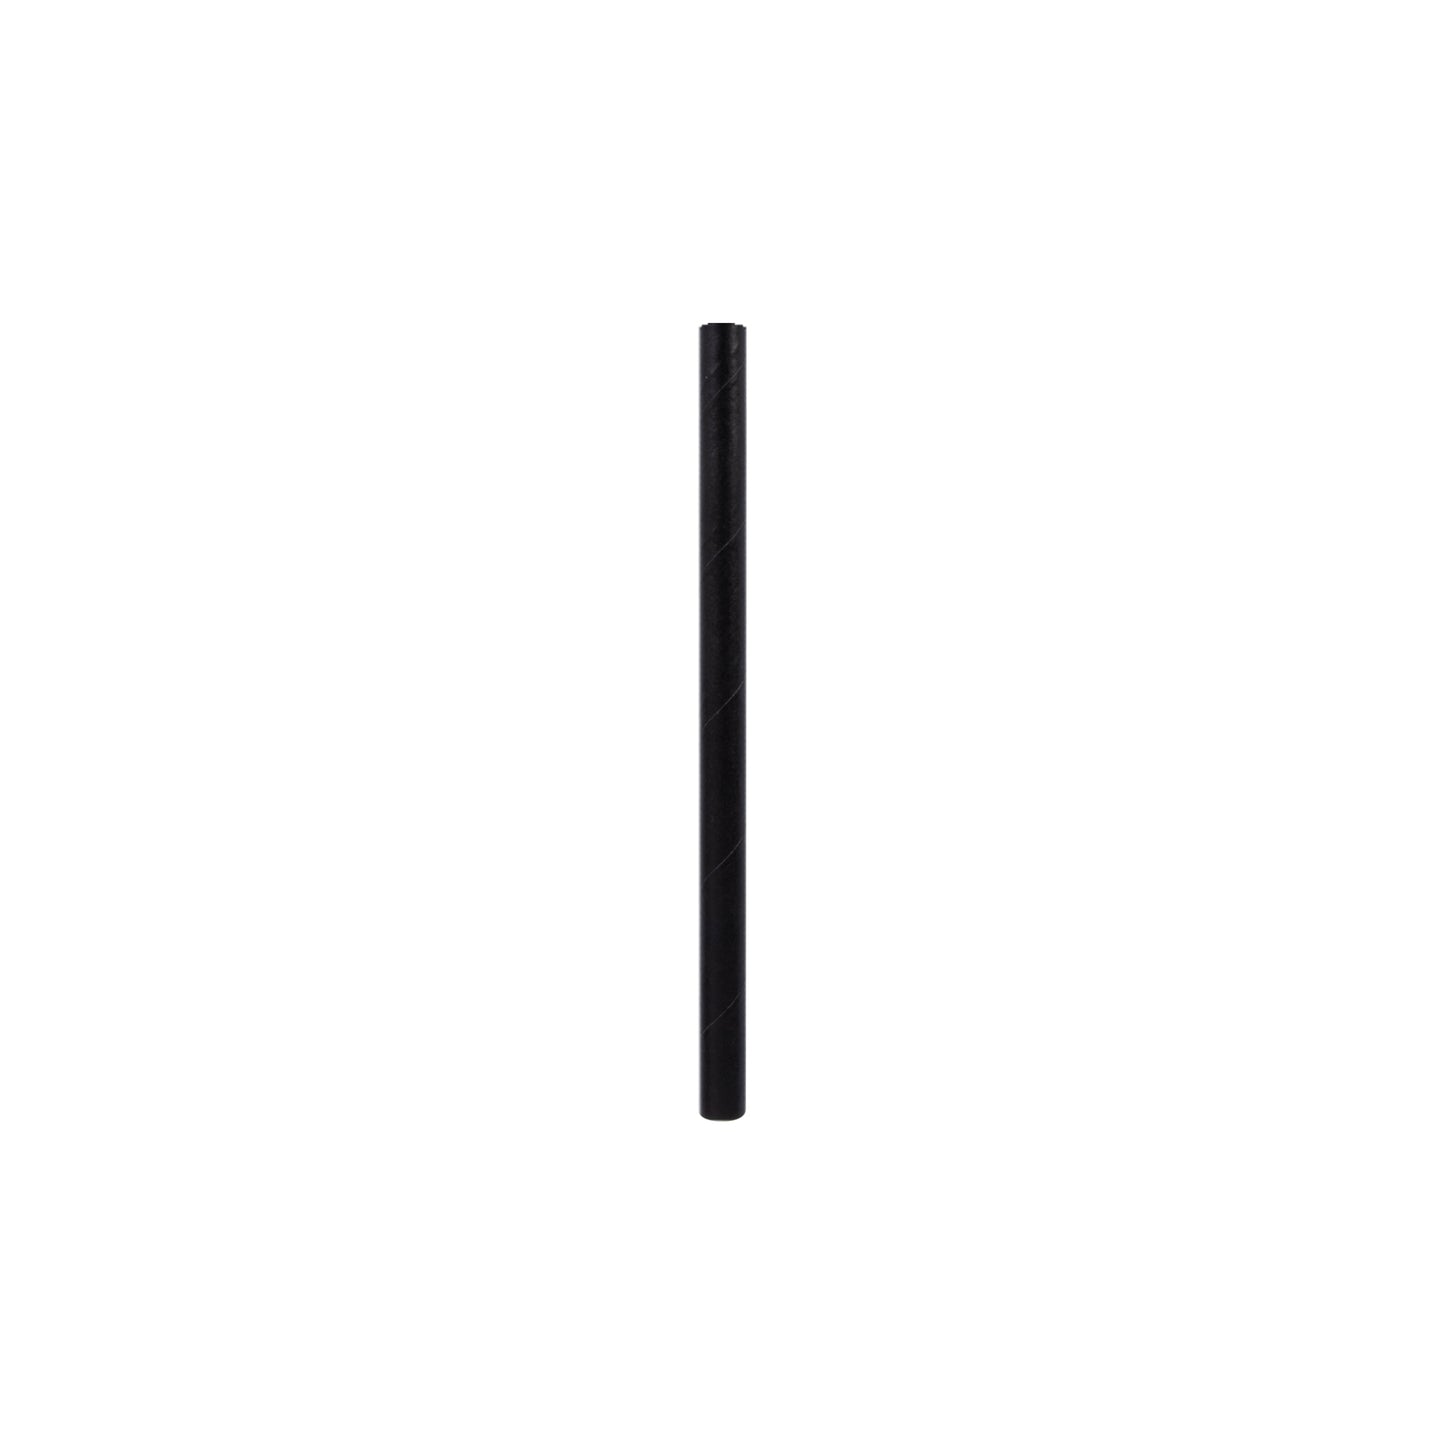 STRONG STRAWS - 5 PLY JUMBO COCKTAIL PAPER STRAW - BLACK